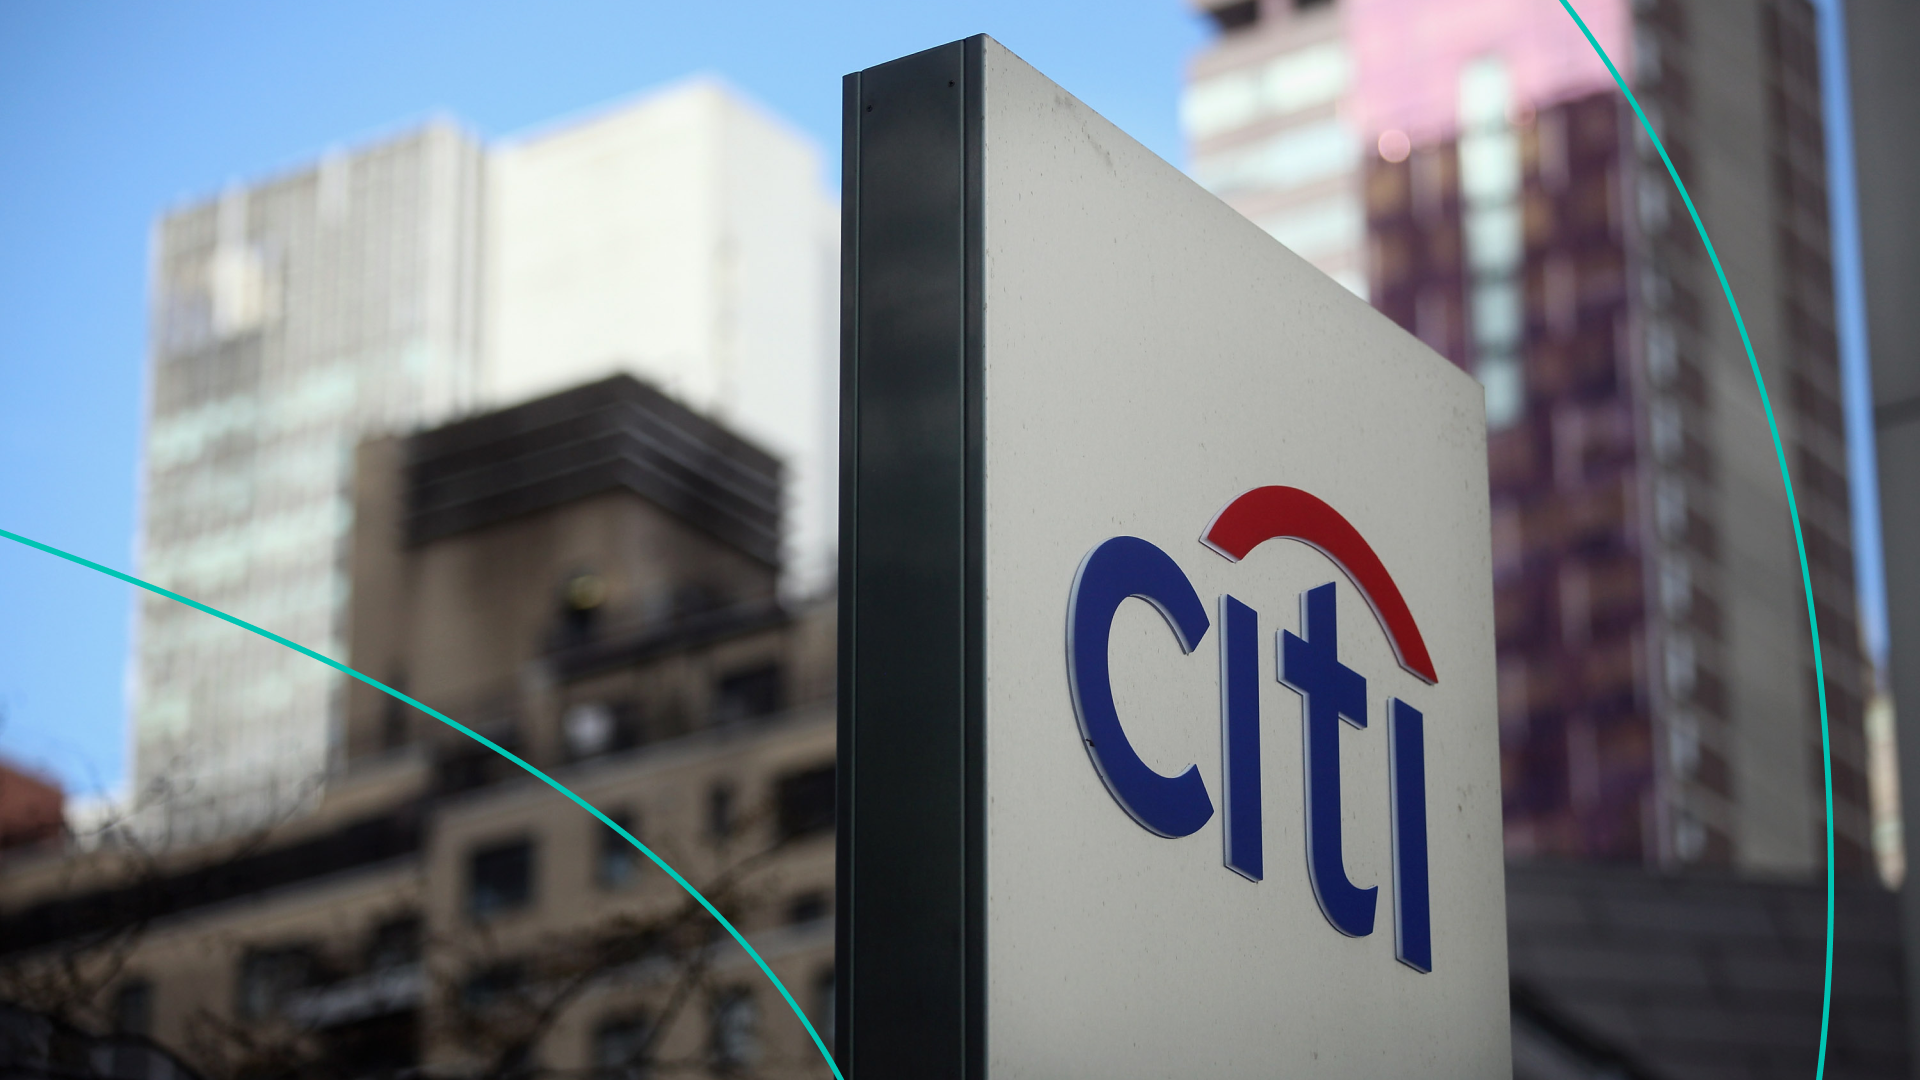 A 'Citi' sign is displayed outside Citigroup Center near Citibank headquarters in Manhattan